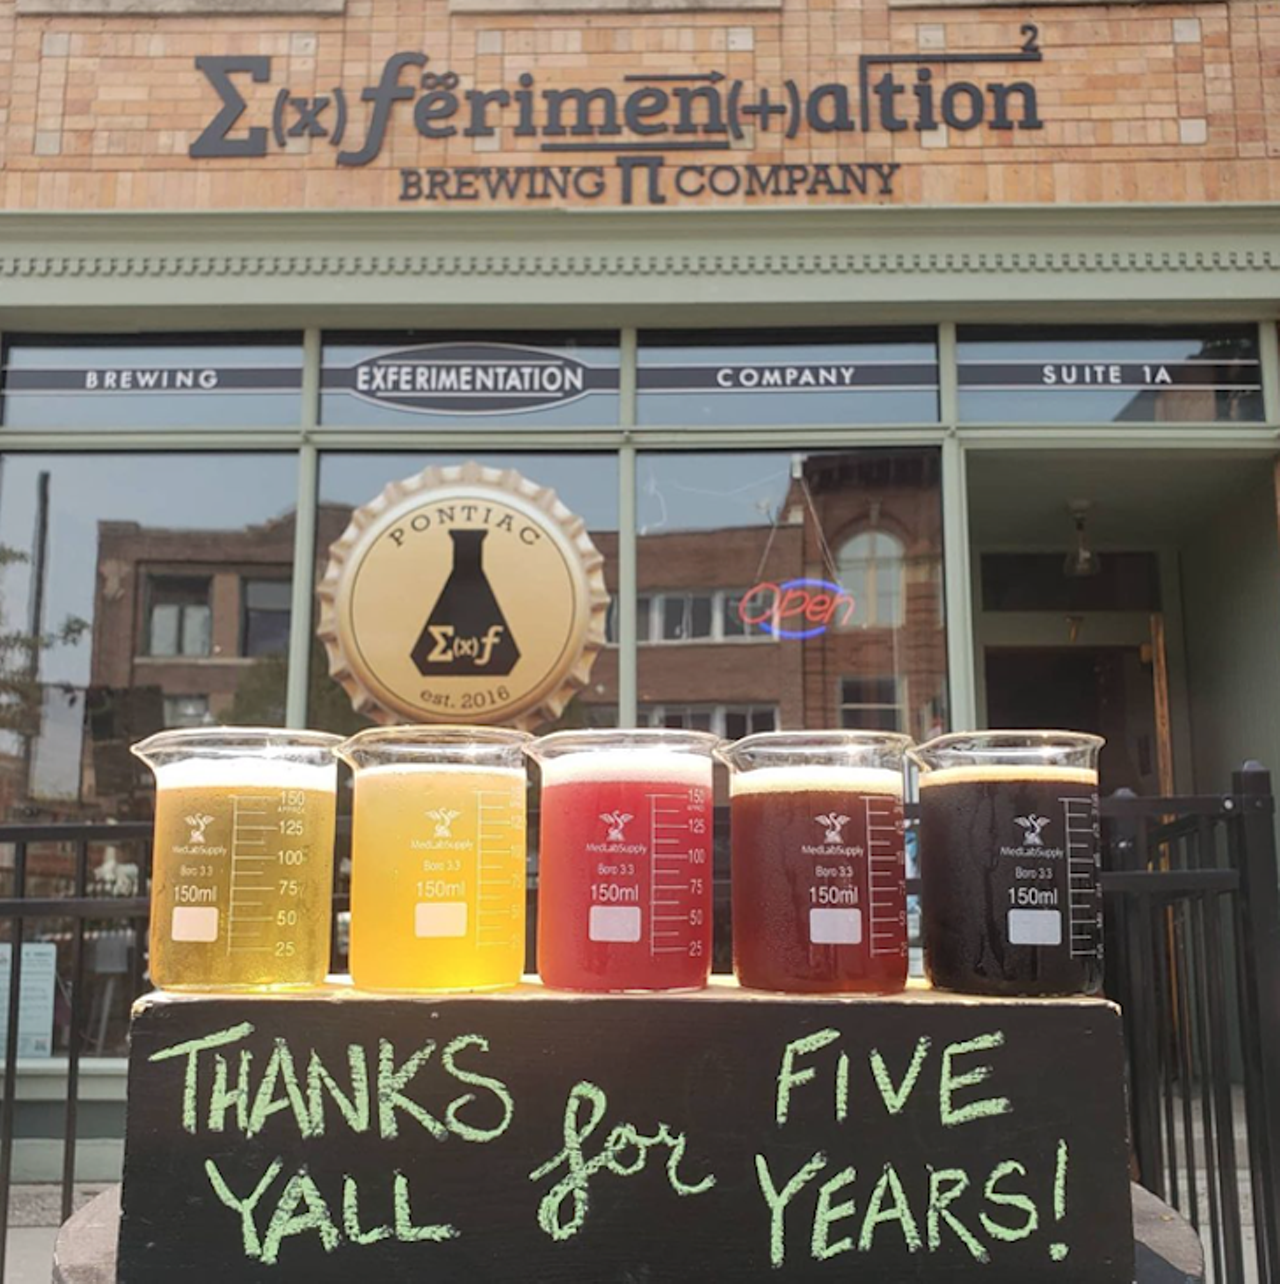 Exferimentation Brewing Co.
7 N. Saginaw St., Pontiac
After five years in business, Exerimentation Brewing Co. closed its doors citing the pandemic as the reason for the closure.